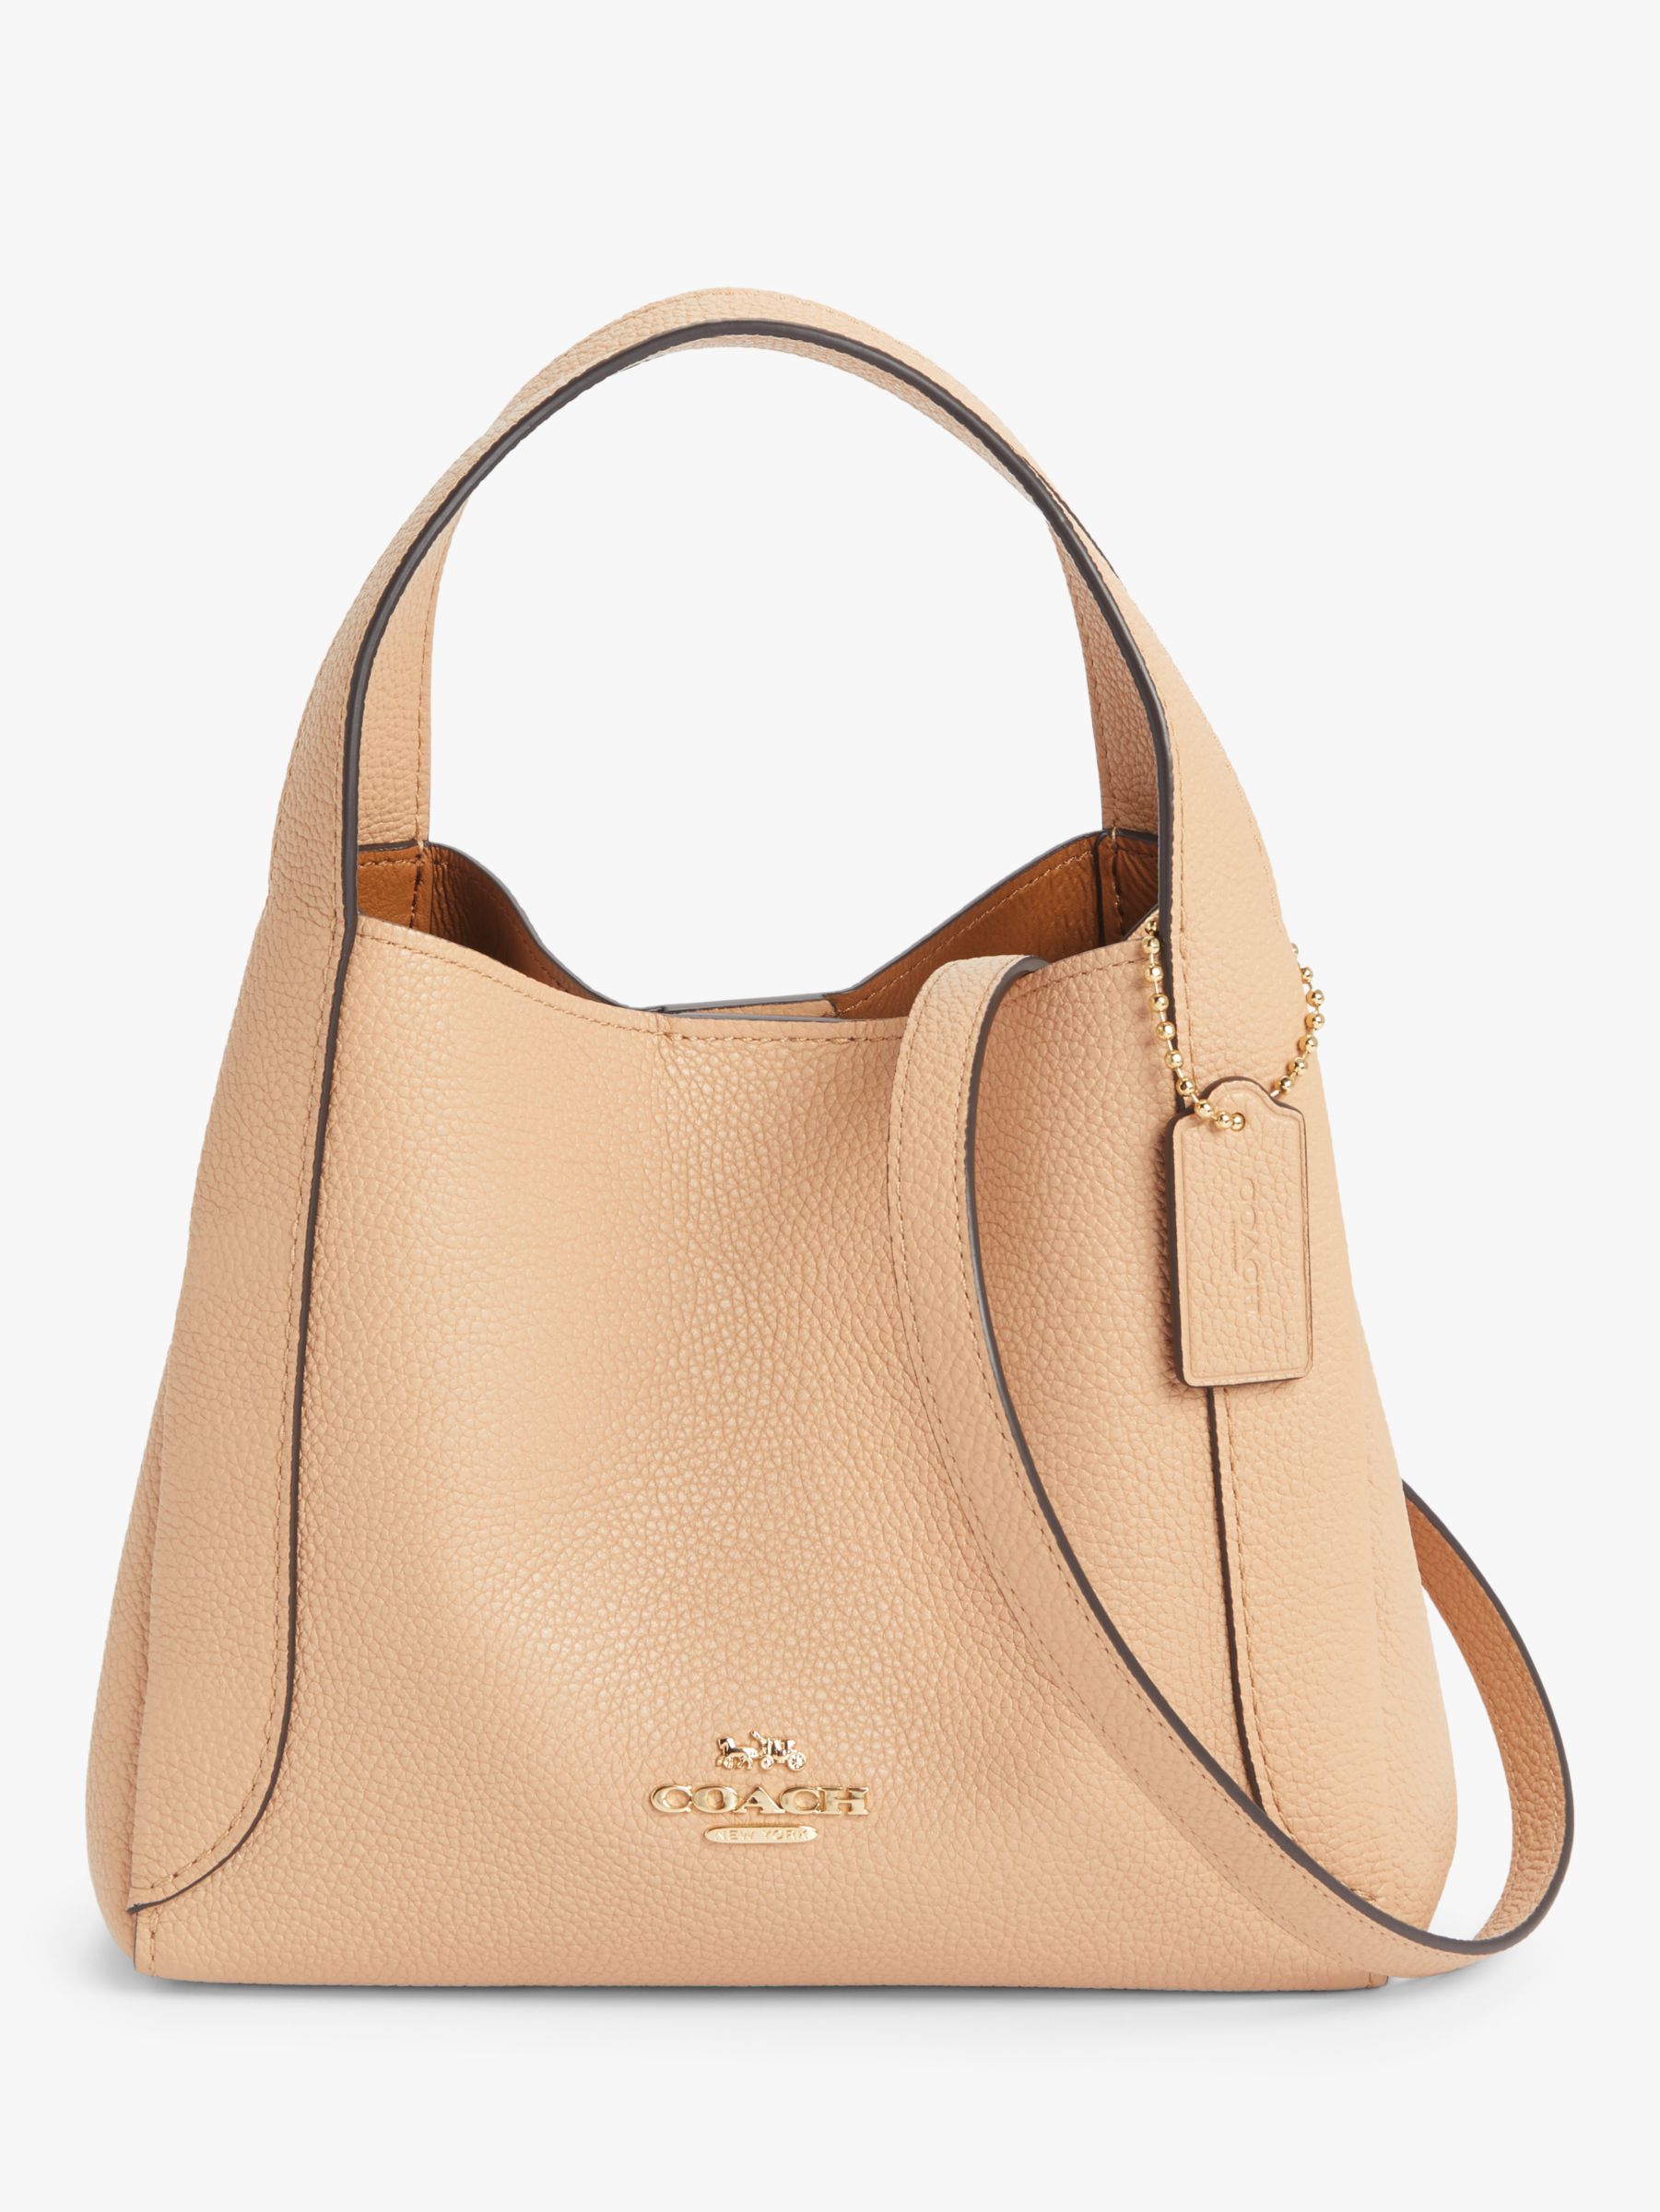 Coach Hadley Leather Small Hobo Bag at John Lewis & Partners